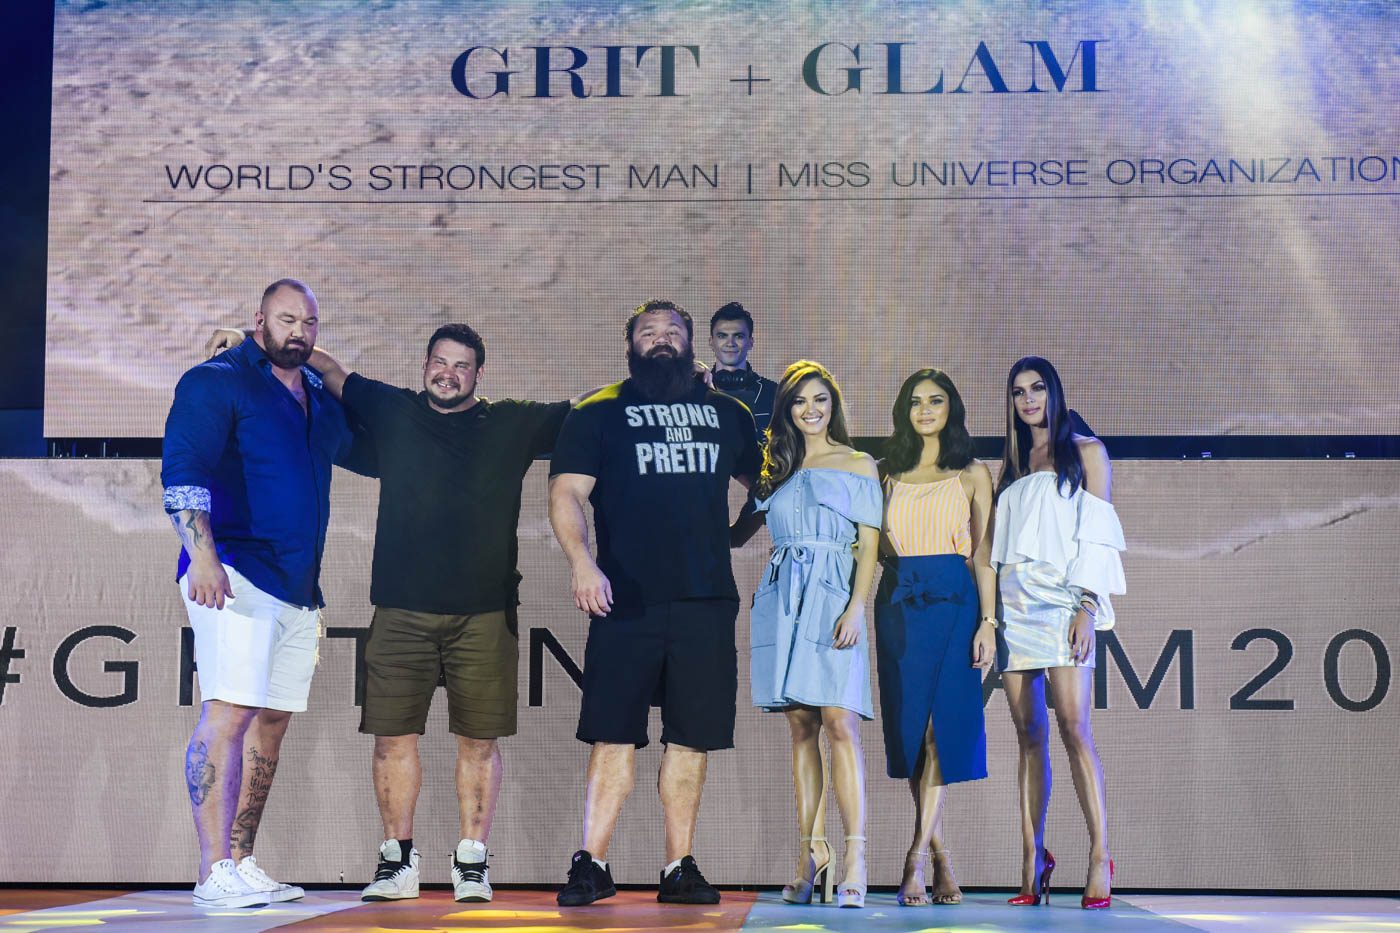 IN PHOTOS: Miss Universe queens, World’s Strongest Man join ‘Grit and Glam’ fashion show